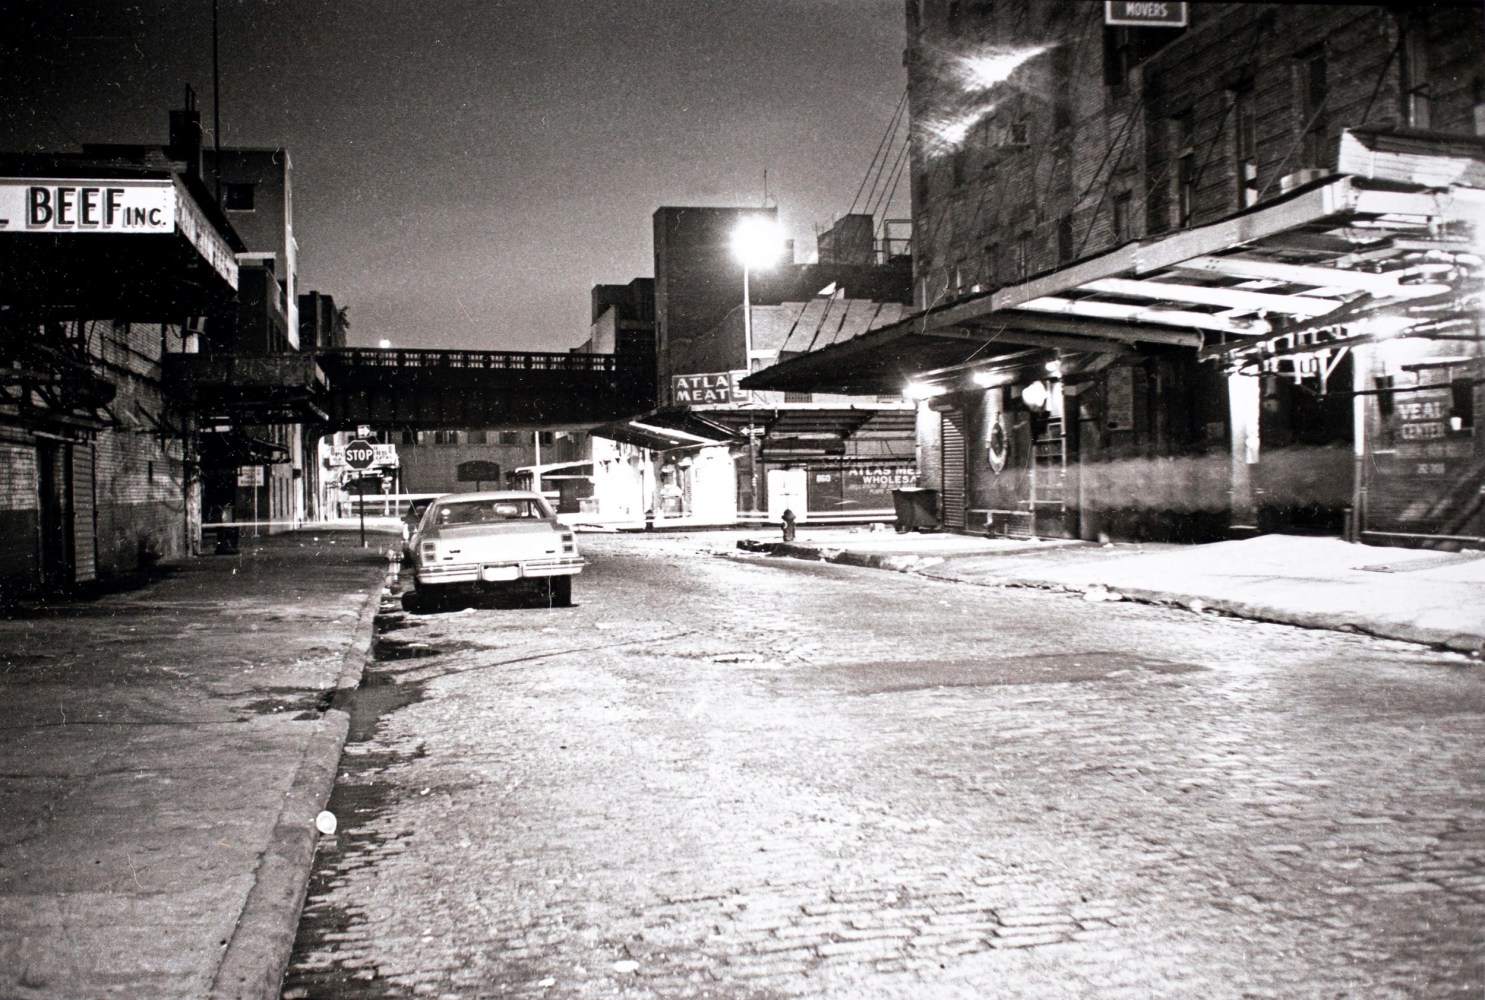 Efrain John Gonzalez
Meatpacking District on a Sunday Afternoon, 1986
Silver gelatin print
12 x 19.75 inches&amp;nbsp;